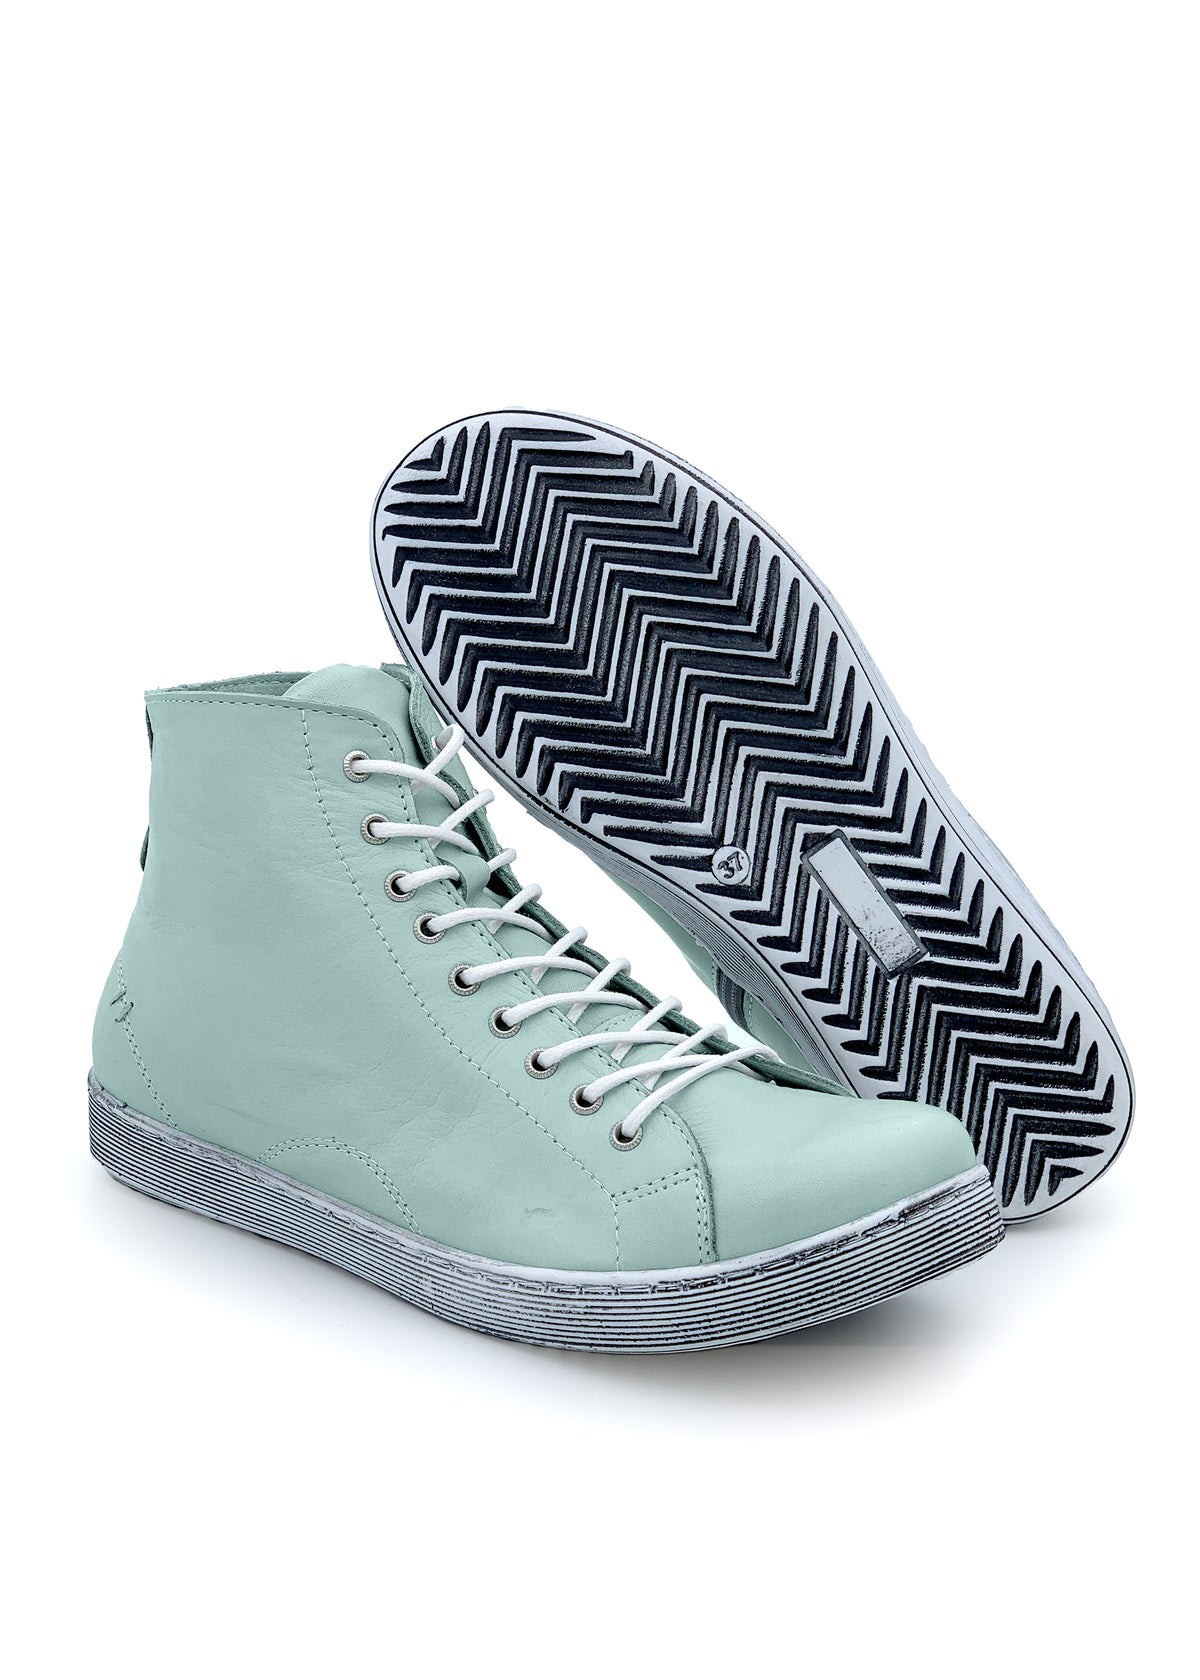 Sneakers with handles - mint green